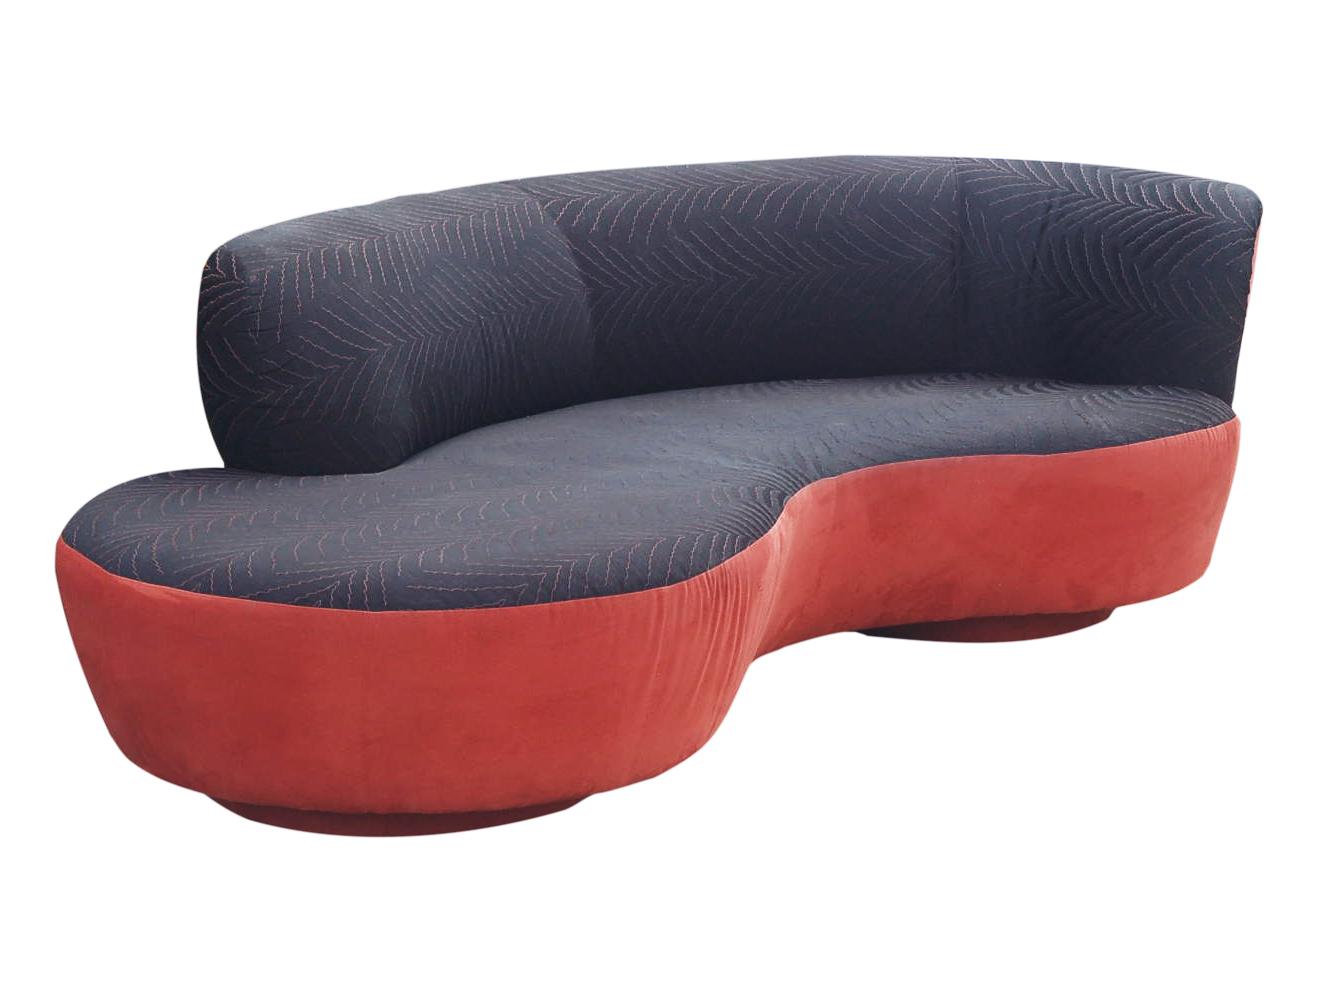 North American Mid-Century Modern Curved Serpentine Cloud Sofa by Weiman For Sale